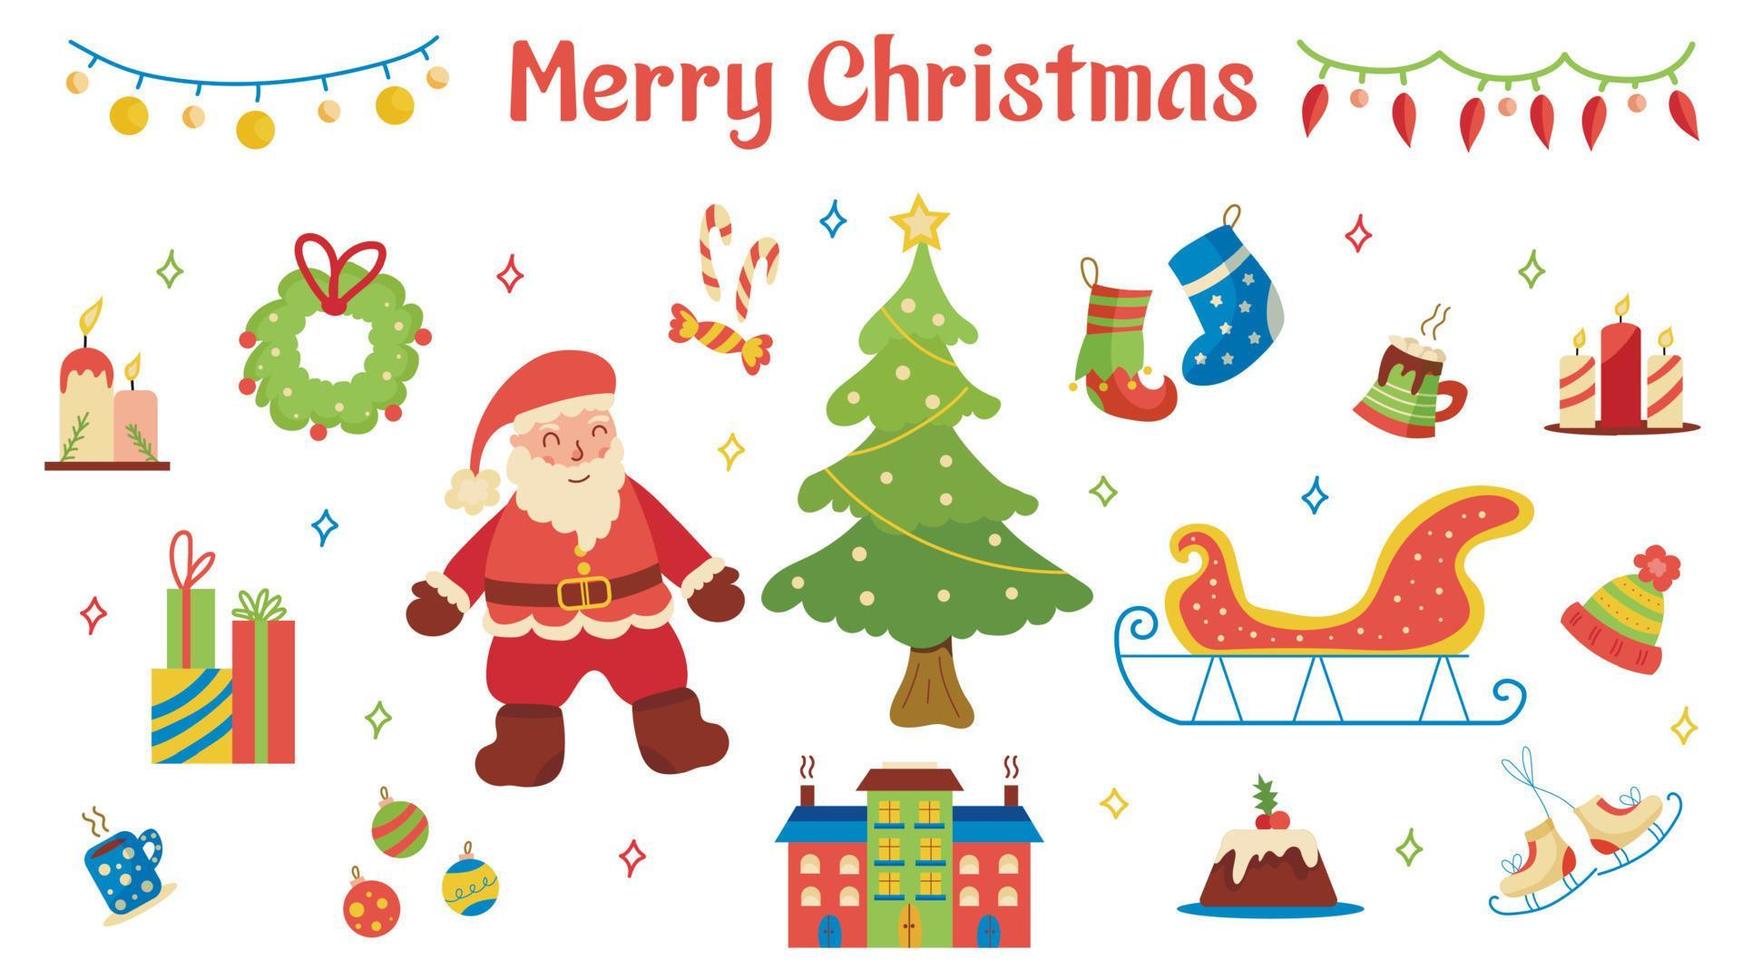 Christmas and New Year set on a white background. Collection of flat vector illustrations with santa claus, christmas tree, present, candles, candies, skates, christmas socks, cocoa, cake, sleigh.